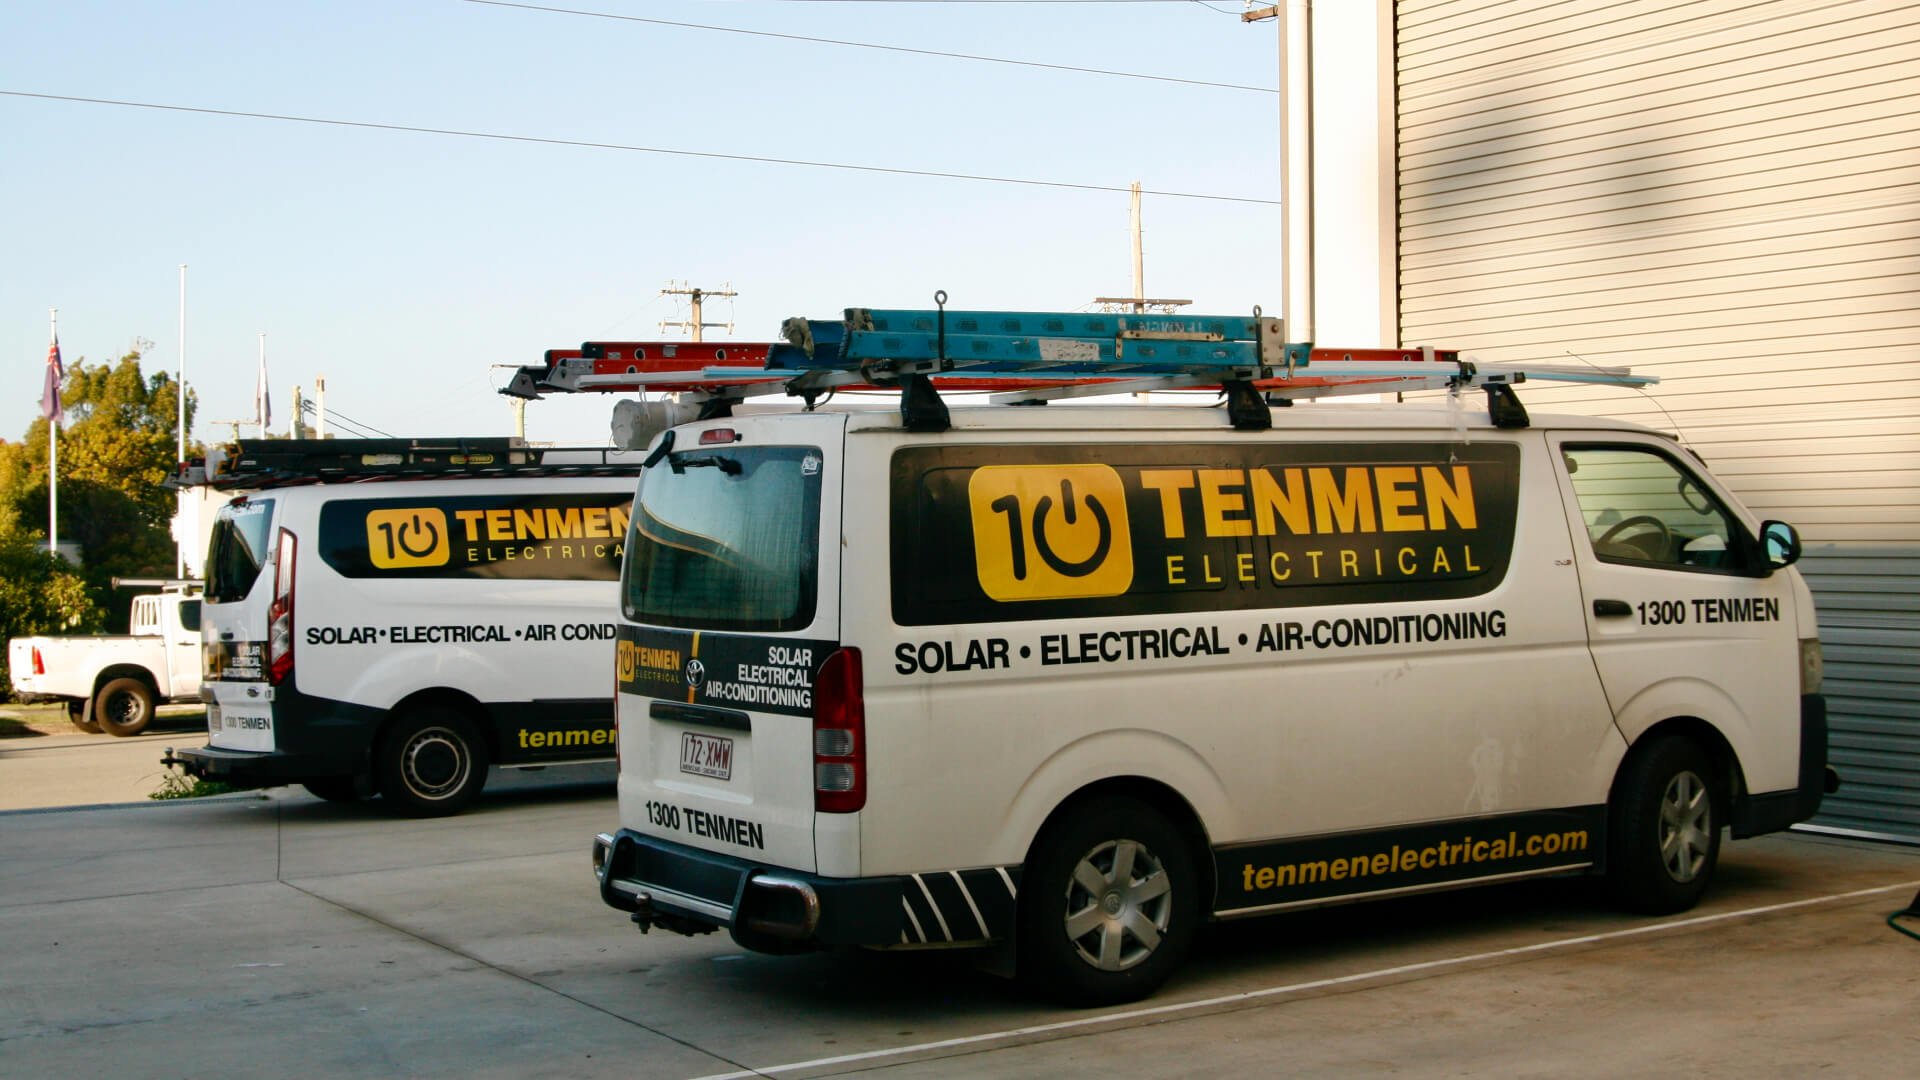 Two Tenmen Electrical vans parked in front of a building.